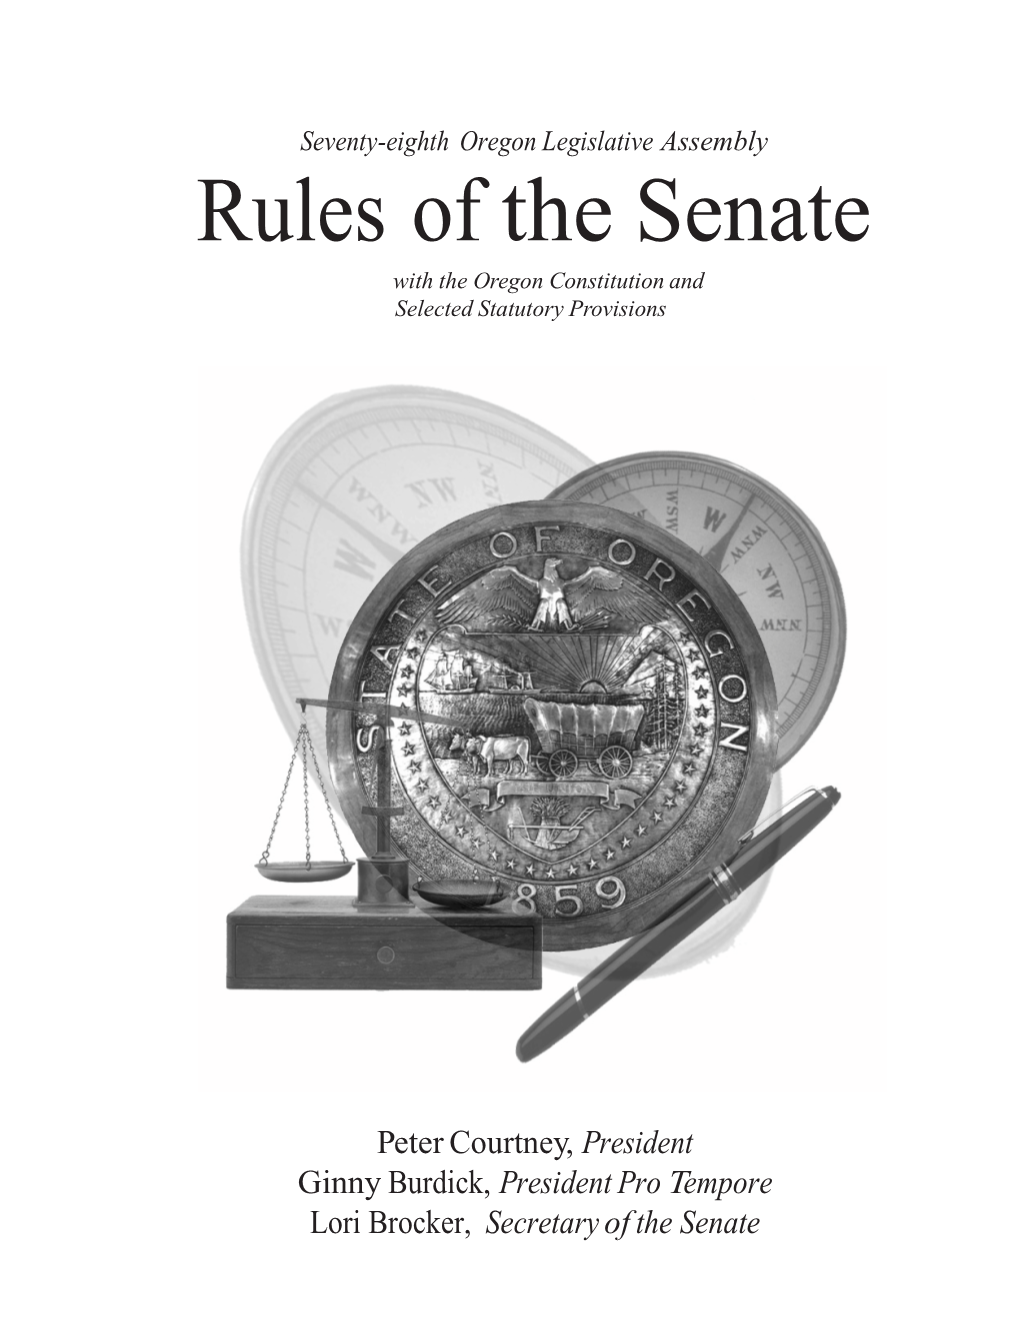 Rules of the Senate with the Oregon Constitution and Selected Statutory Provisions